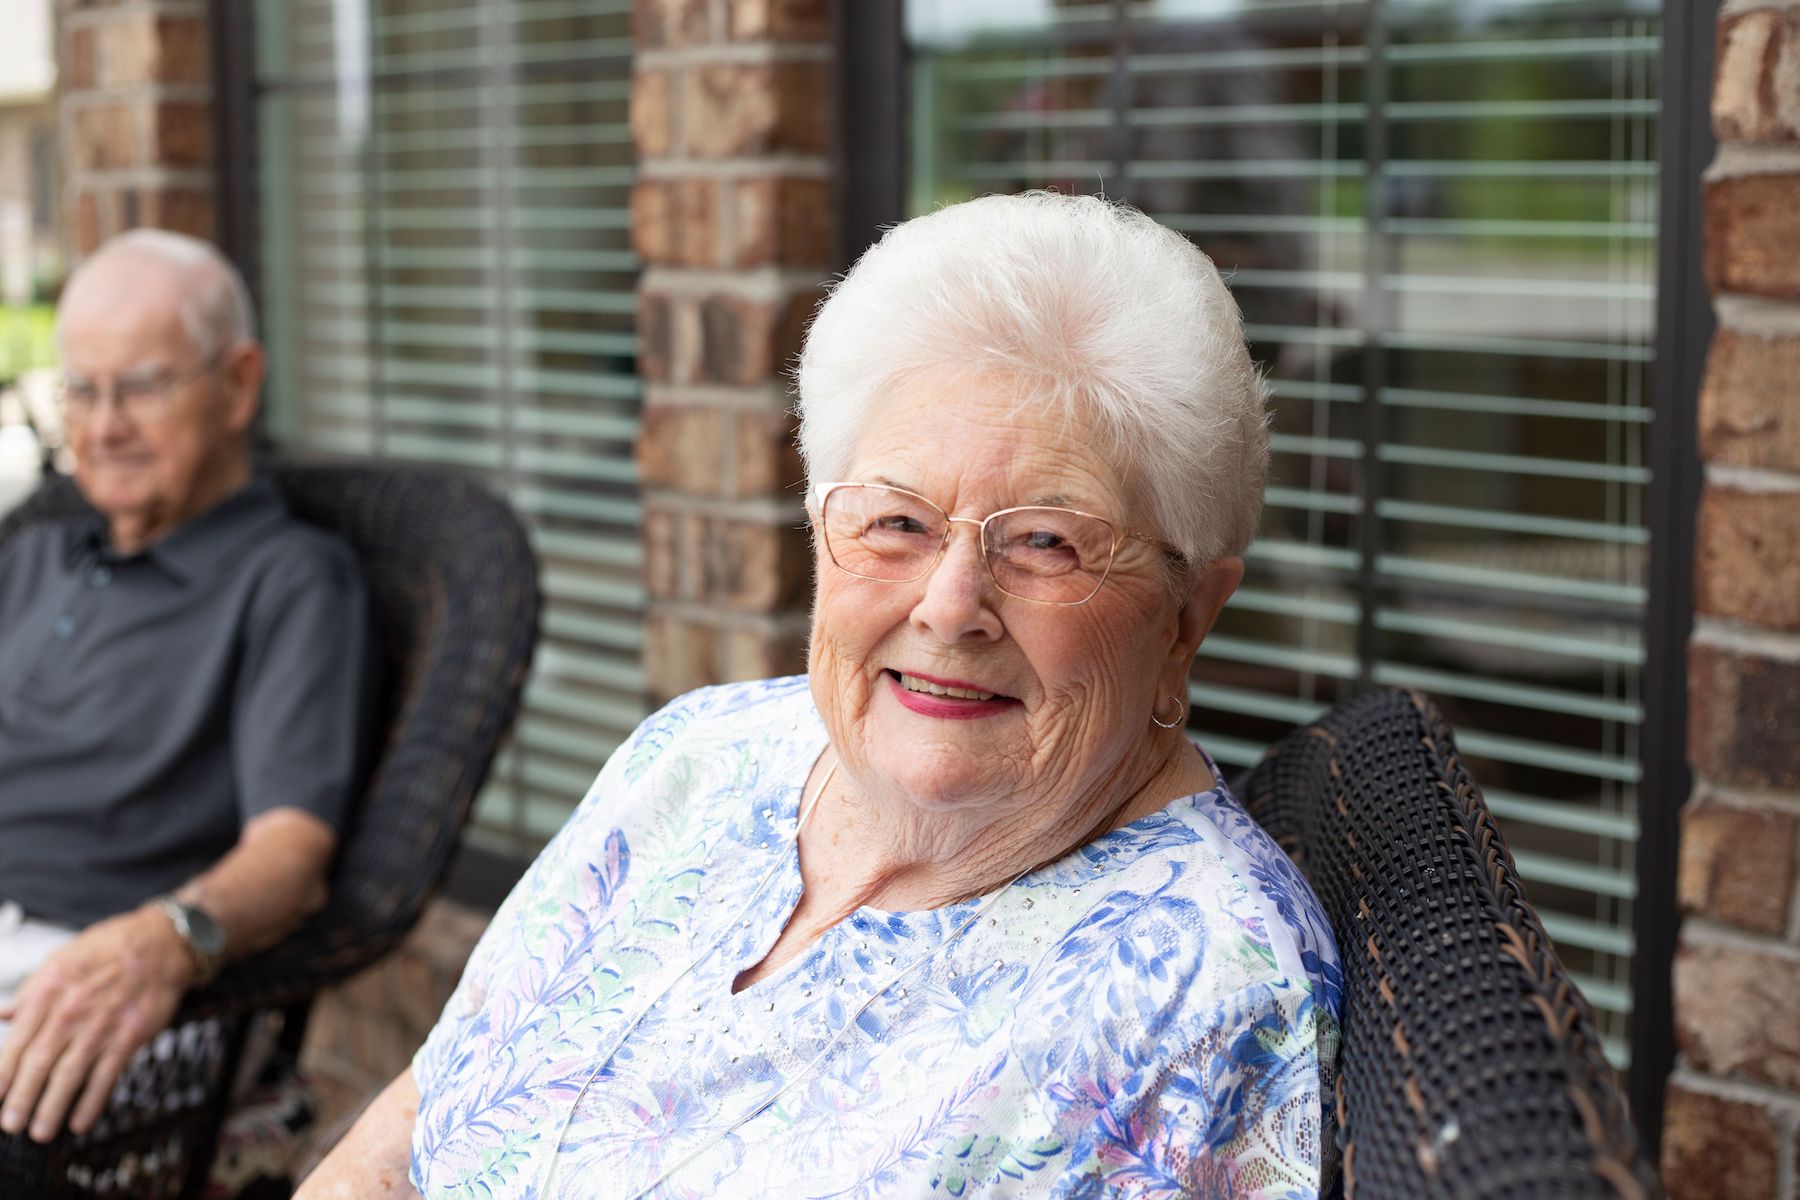 Senior woman smiling at the camera as she socializes with friends on a patio